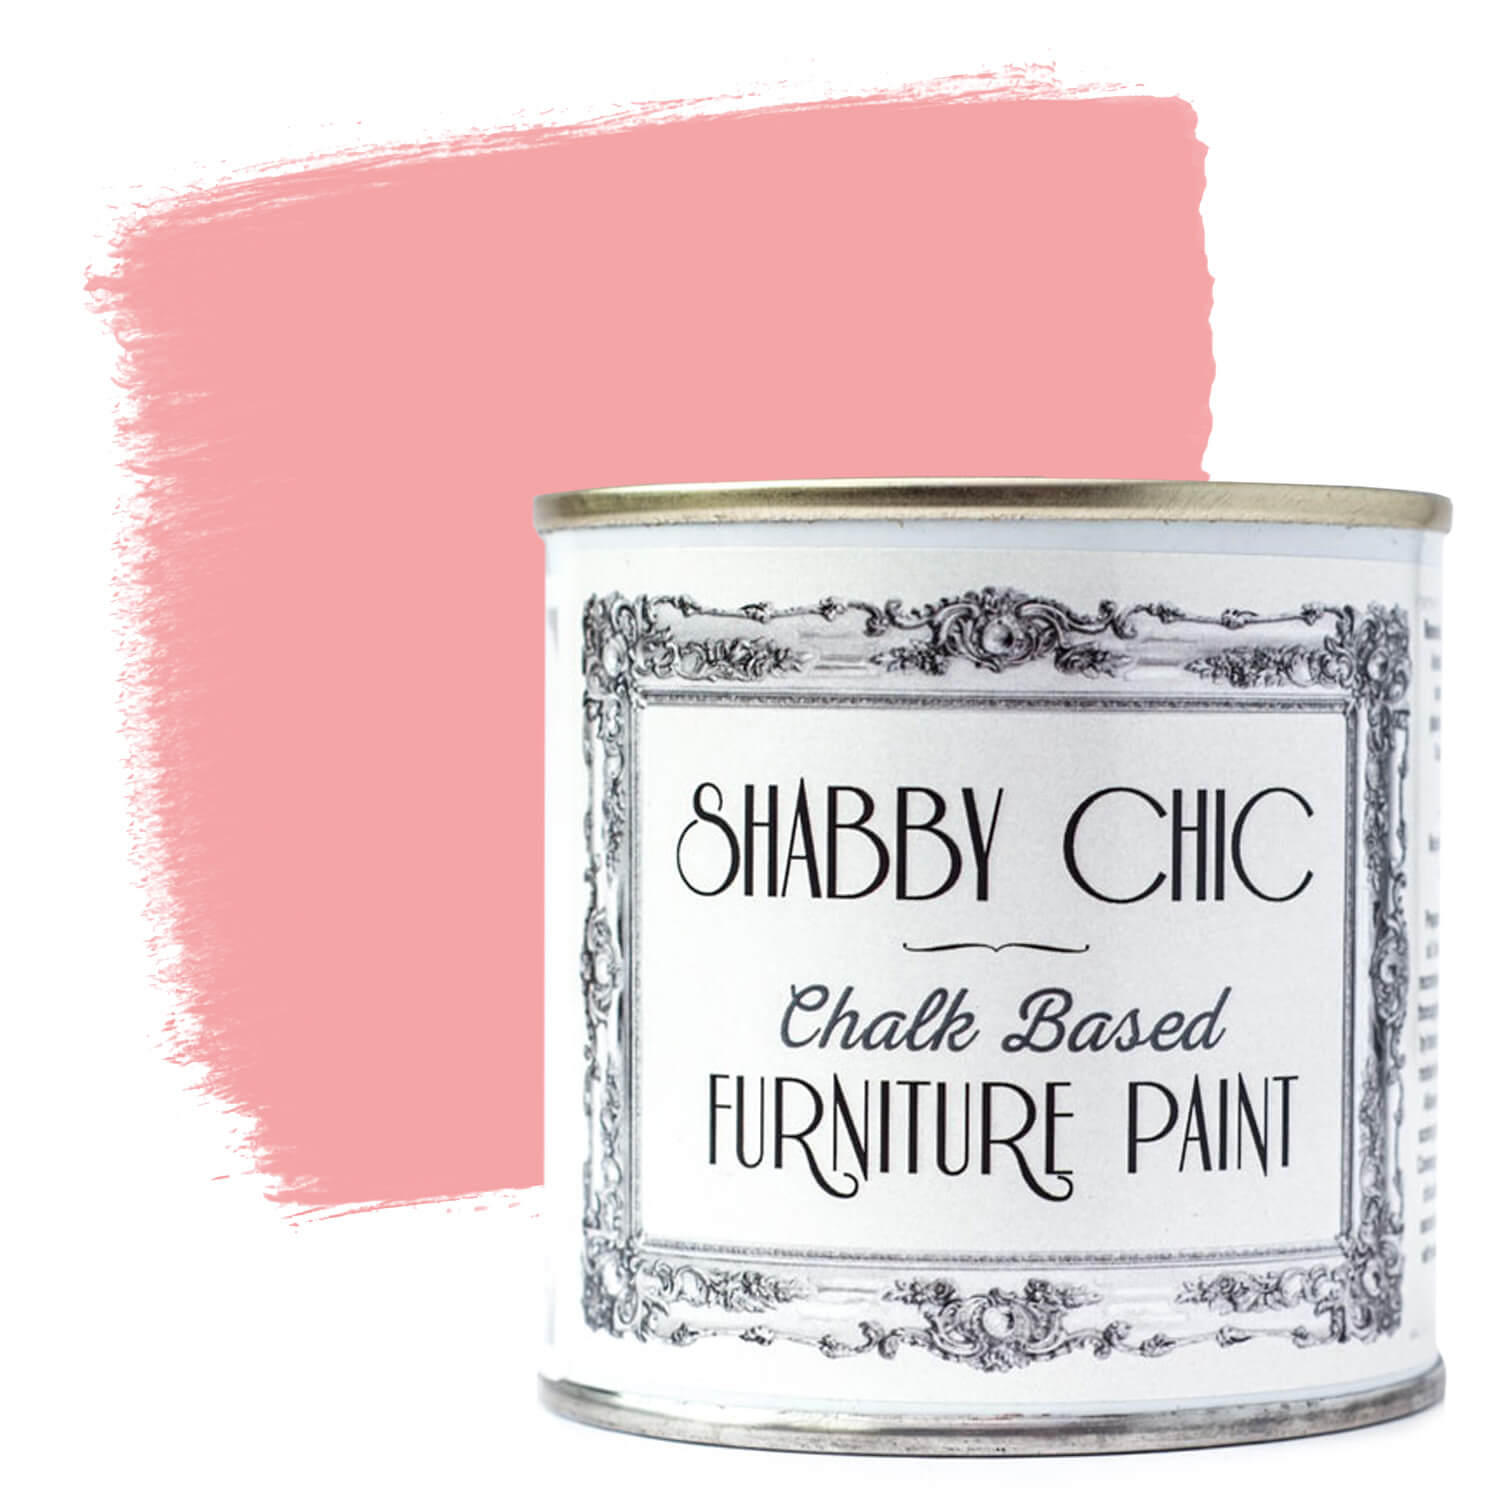 Shabby Chic Furniture Paint in Dusky Pink